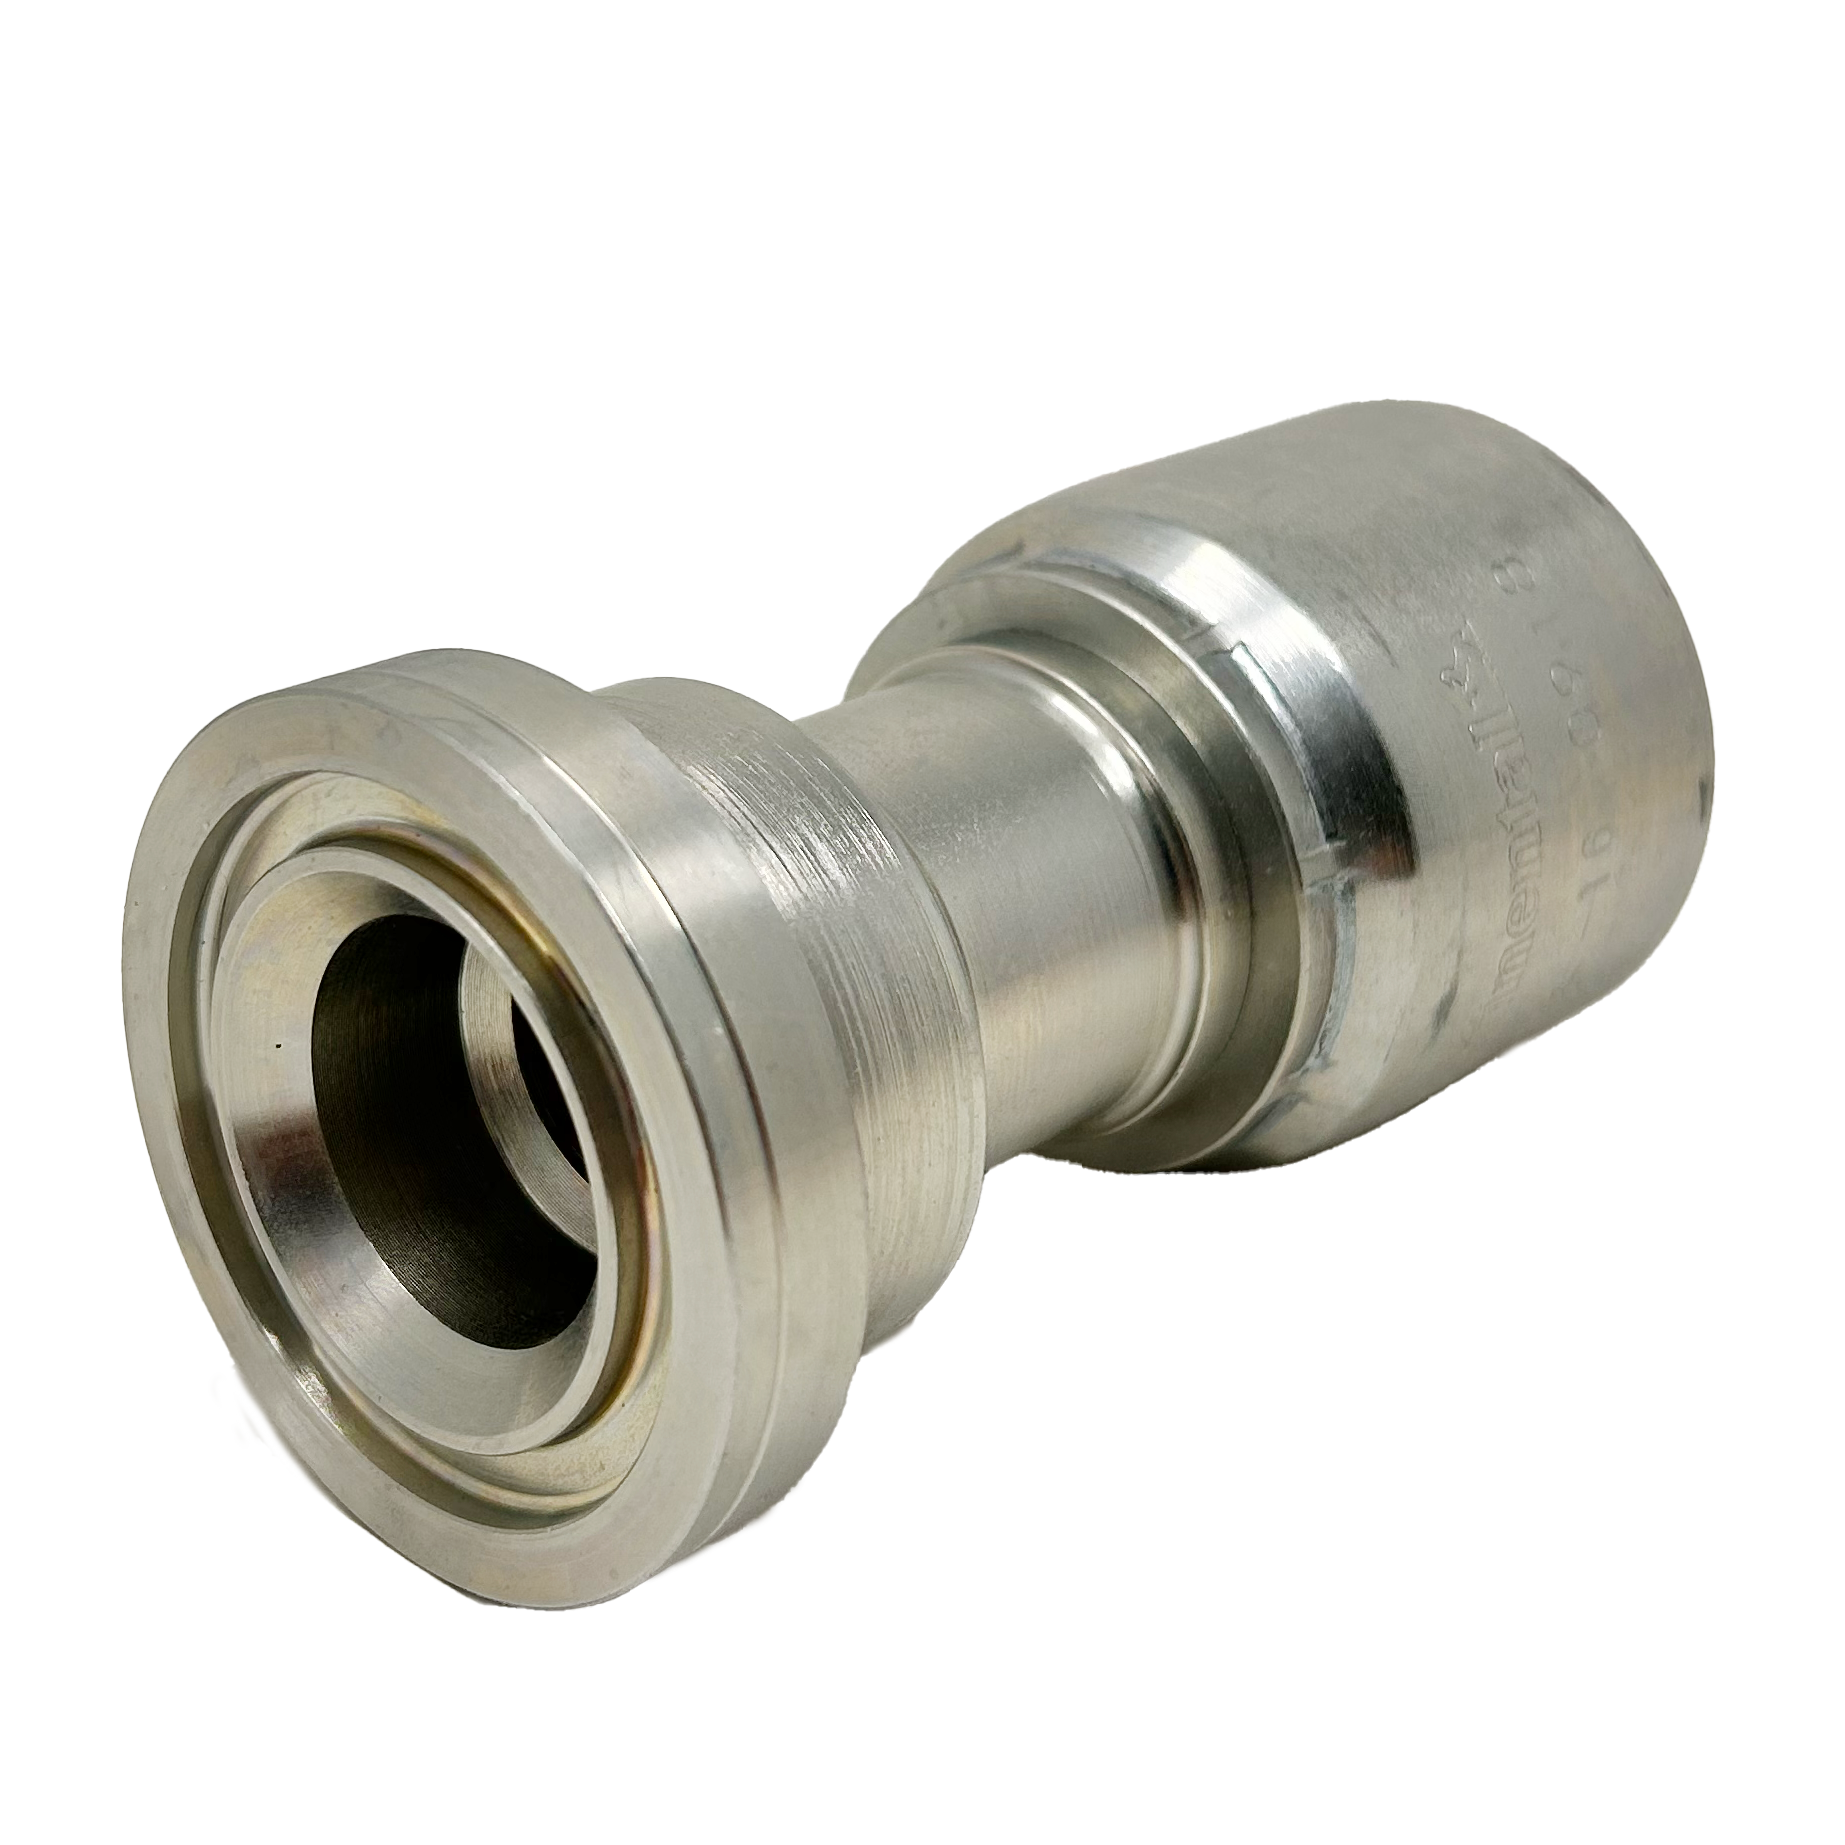 B2-FH-1620: Continental Hose Fitting, 1" Hose ID x 1.25 (1-1/4") Code 62, Straight Connection